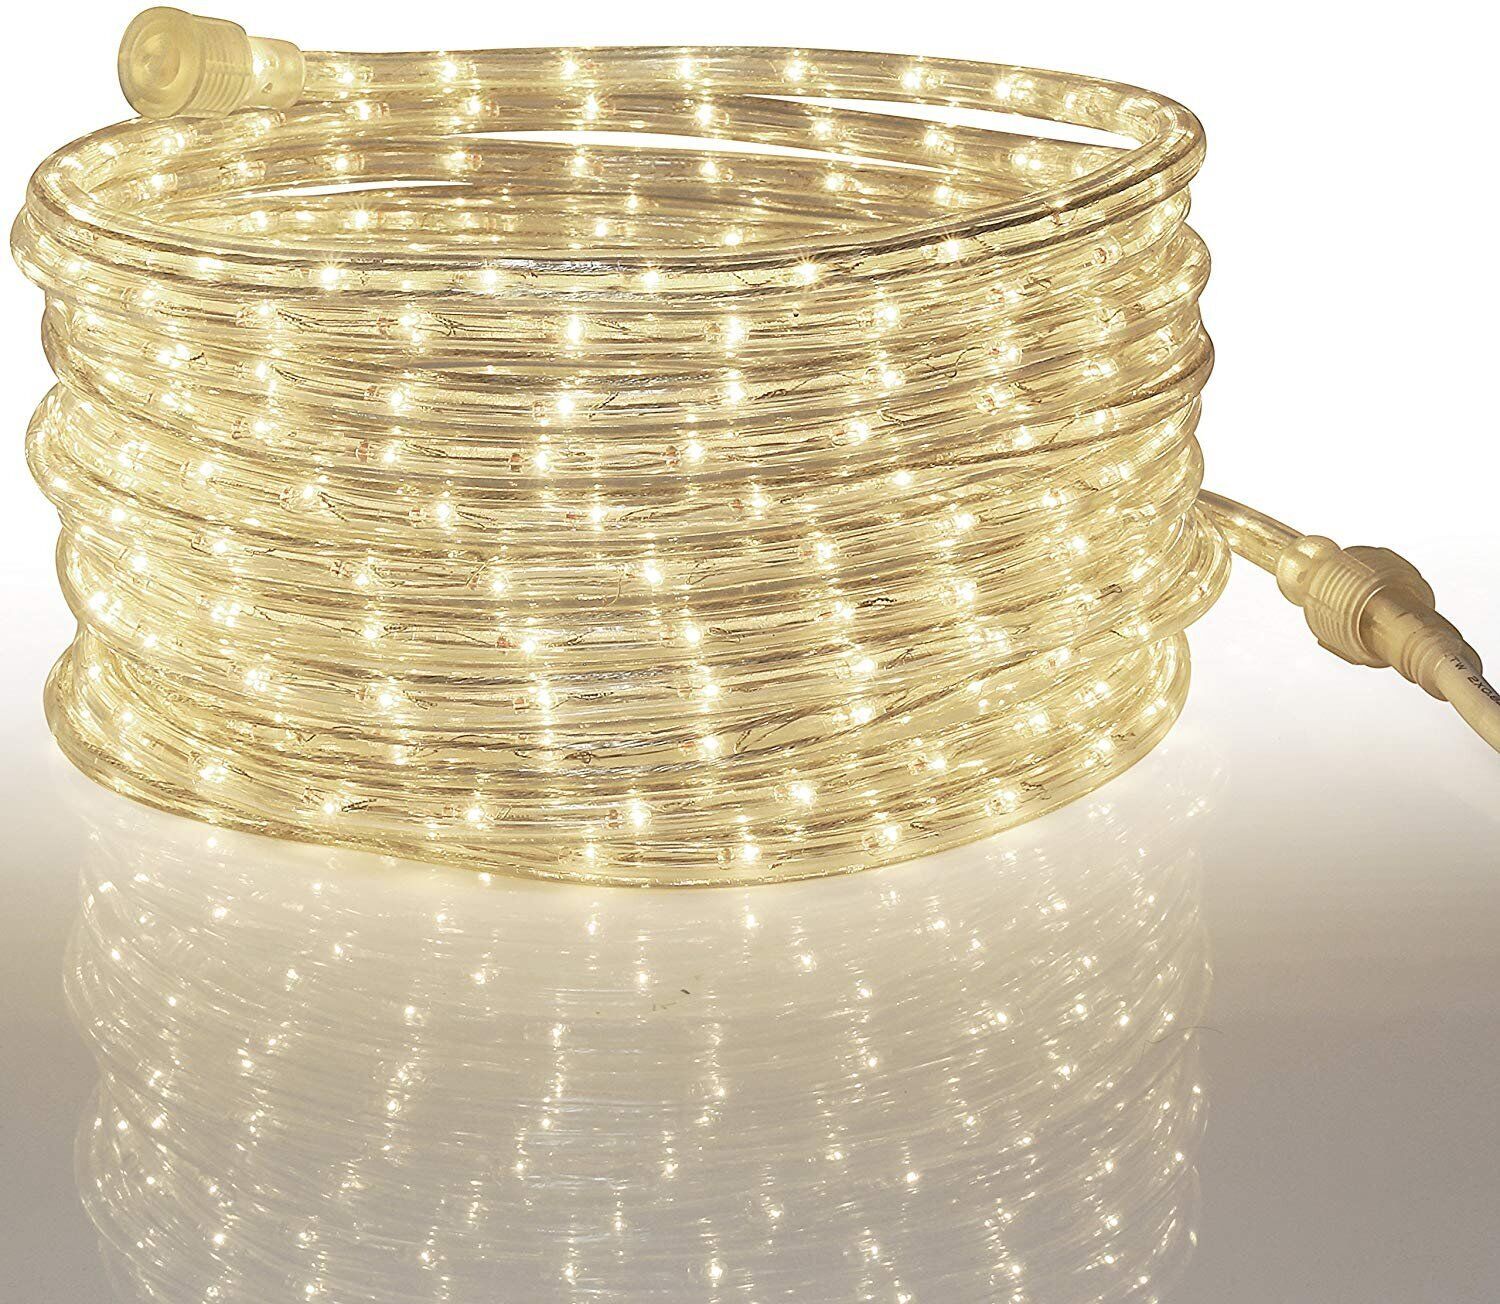 Tupkee LED Rope Light Warm-White - for Indoor and Outdoor use, 24 Feet (7.3...